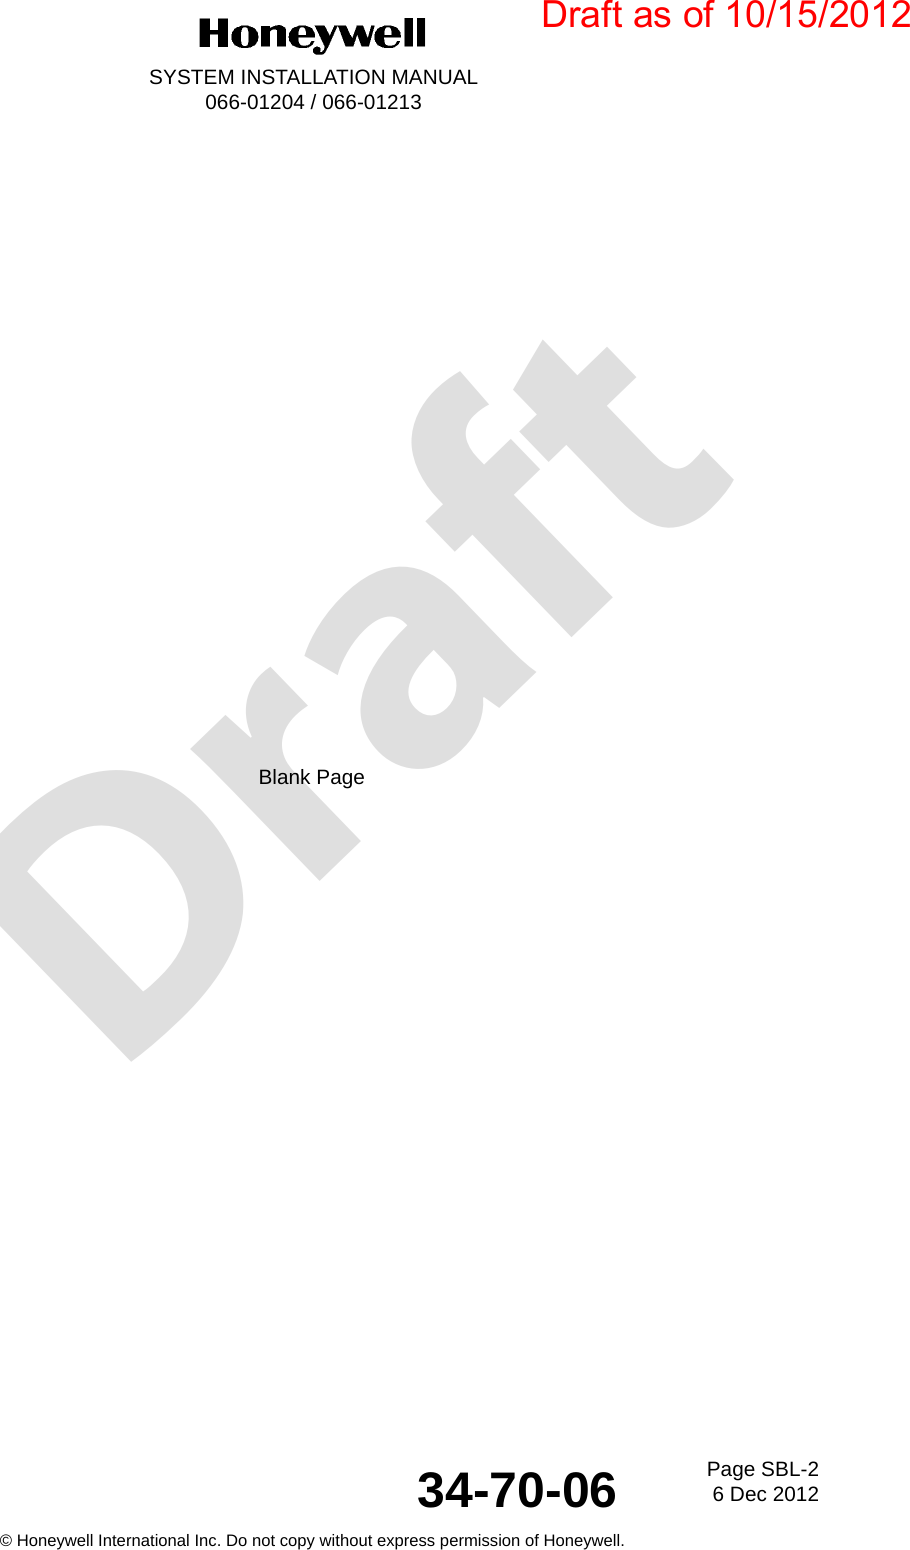 DraftPage SBL-26 Dec 201234-70-06SYSTEM INSTALLATION MANUAL066-01204 / 066-01213© Honeywell International Inc. Do not copy without express permission of Honeywell.Blank PageDraft as of 10/15/2012